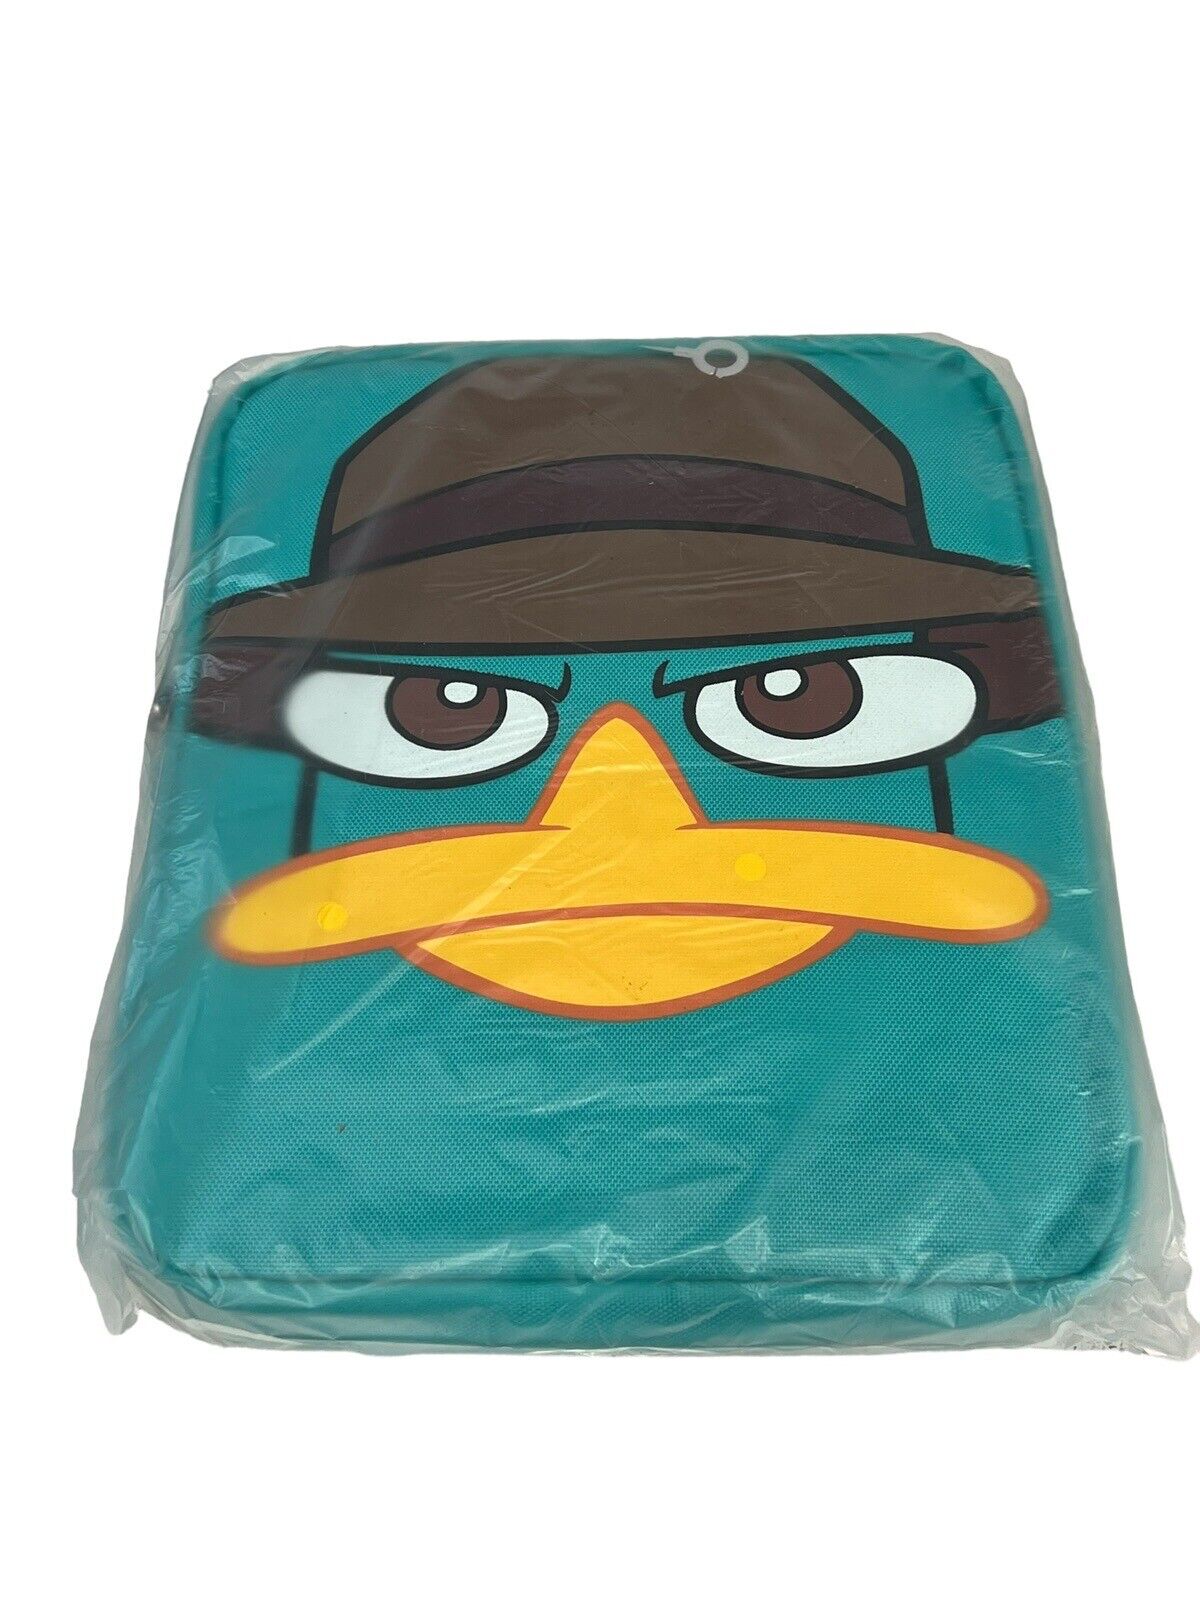 Disney Phineas And Ferb Perry The Platypus Soft Tablet Case Green 10x8 Inches